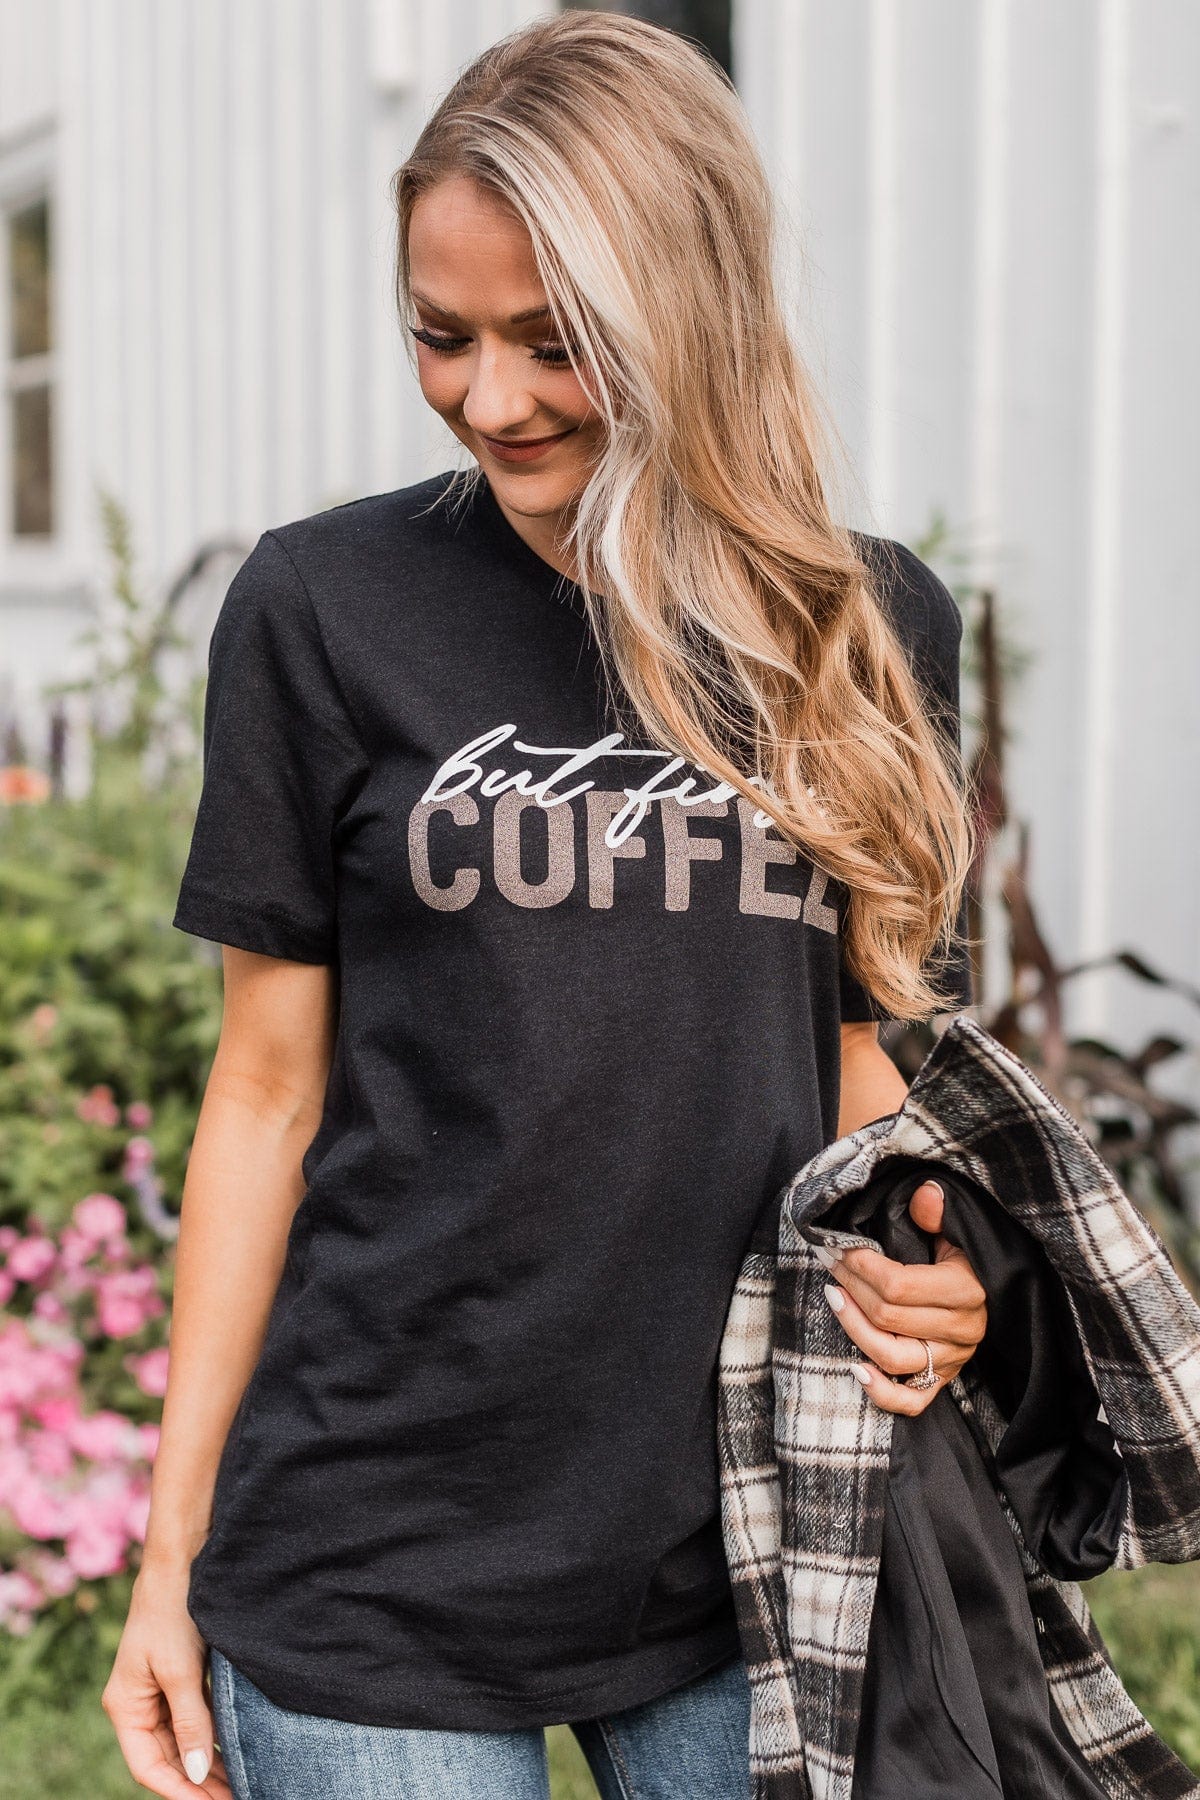 "But First Coffee" Graphic Tee- Black